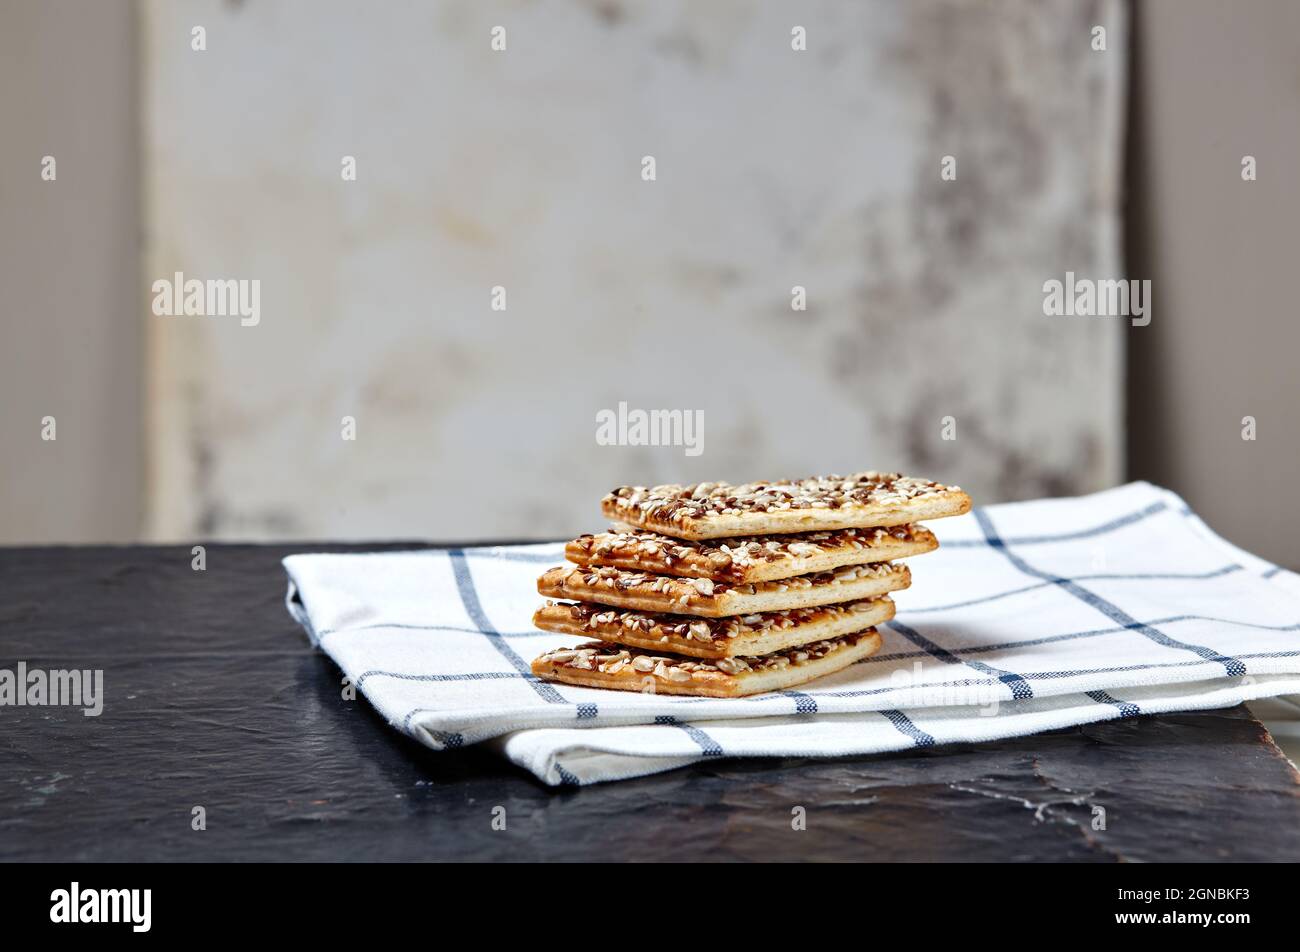 Crisp bread with seeds. Crunchy crispbread on a wooden background. Healthy snack: cereal crunchy multigrain cereal flax seed, sunflower seeds protein Stock Photo